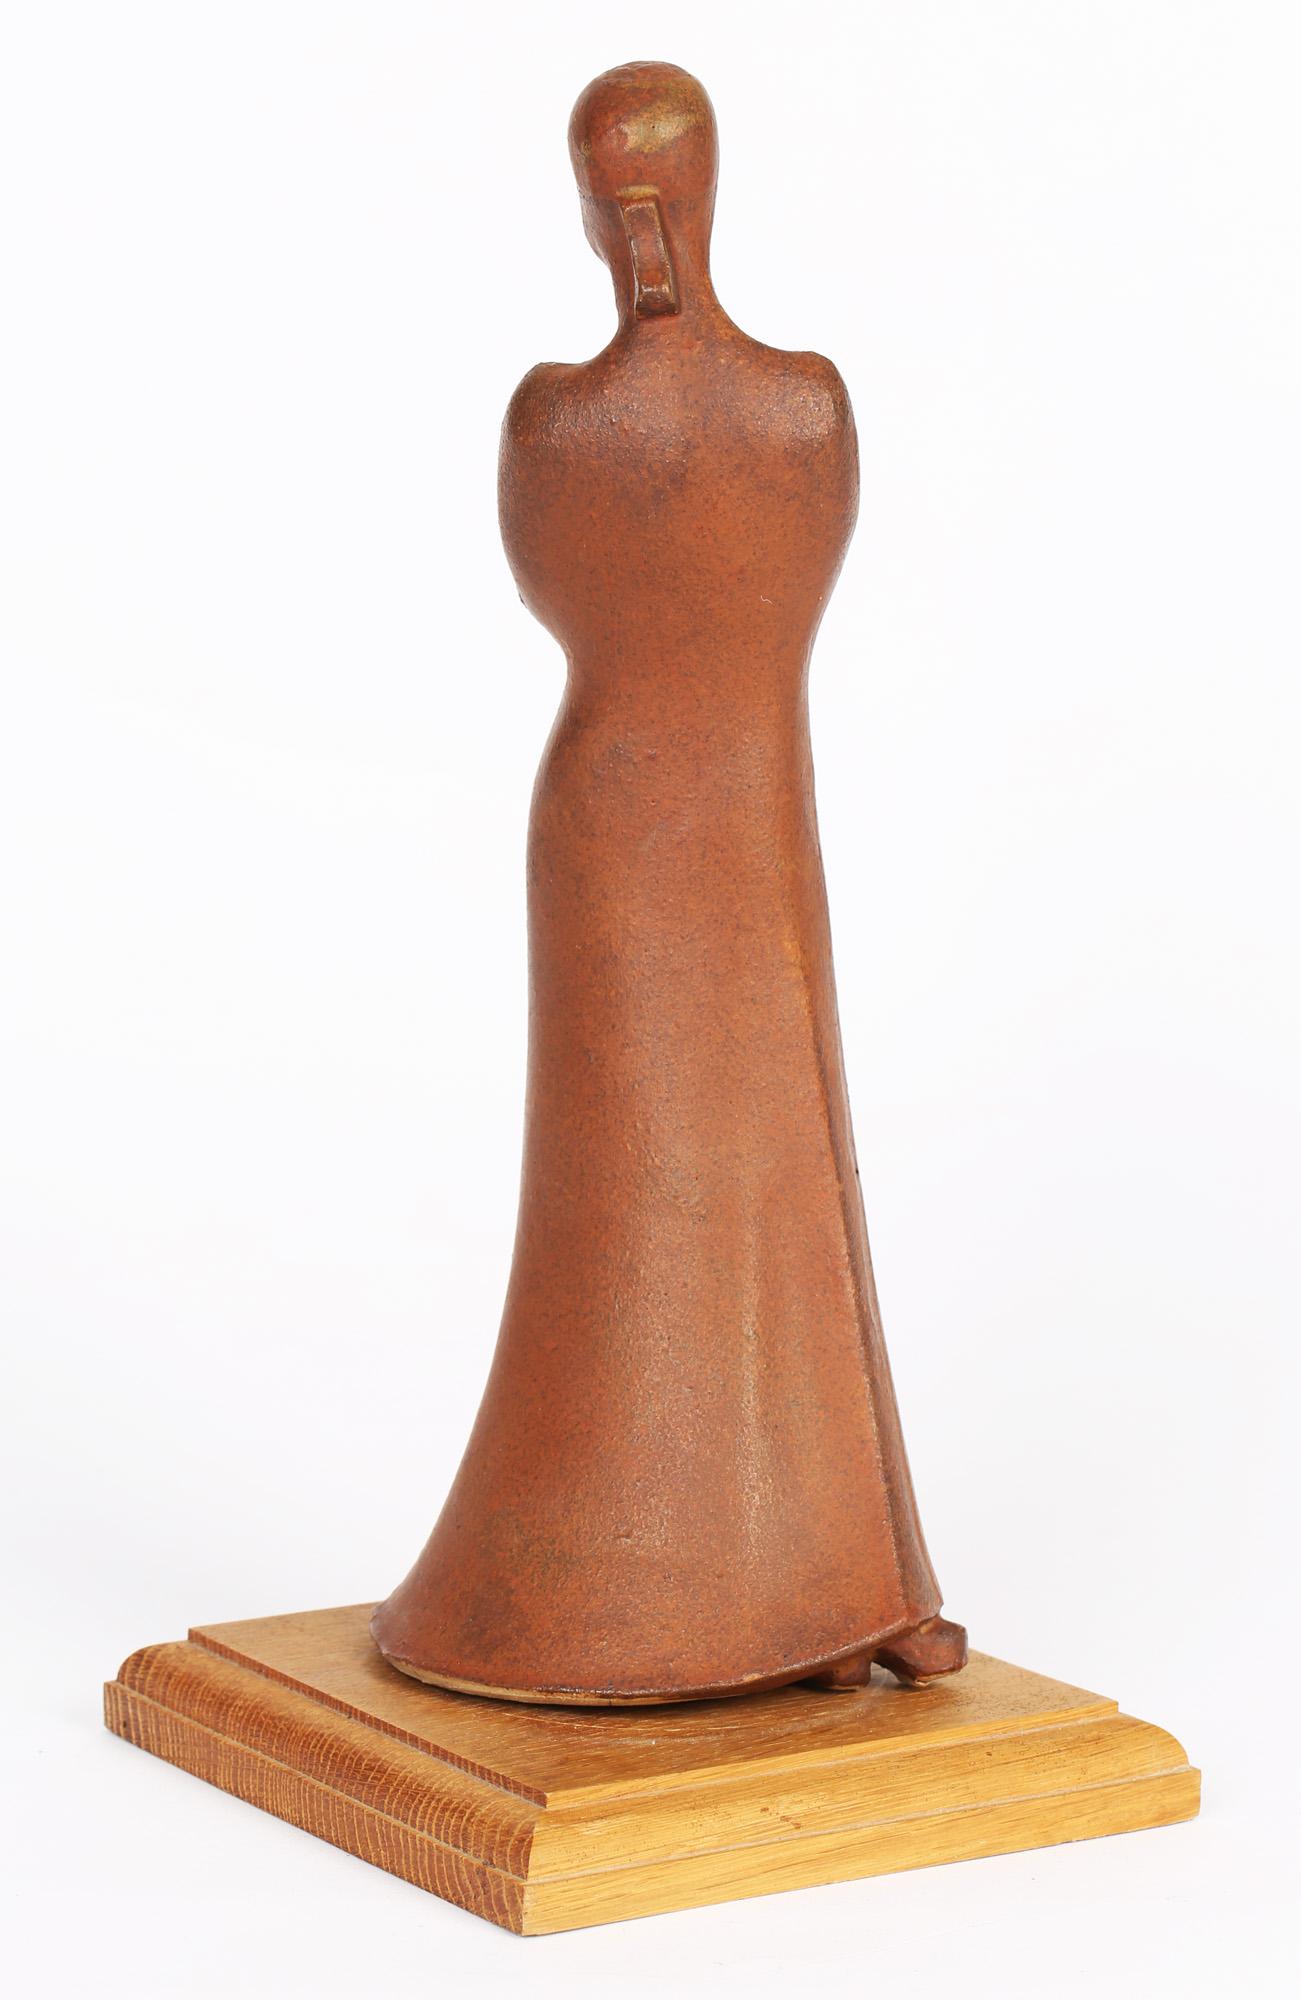 A very stylish terracotta sculptural figure of a lady by renowned sculptor Neal French dating from the latter 20th Century. The figure stands mounted on a wooden base and is simply modeled and in slight abstract wearing a long flowing dress with a